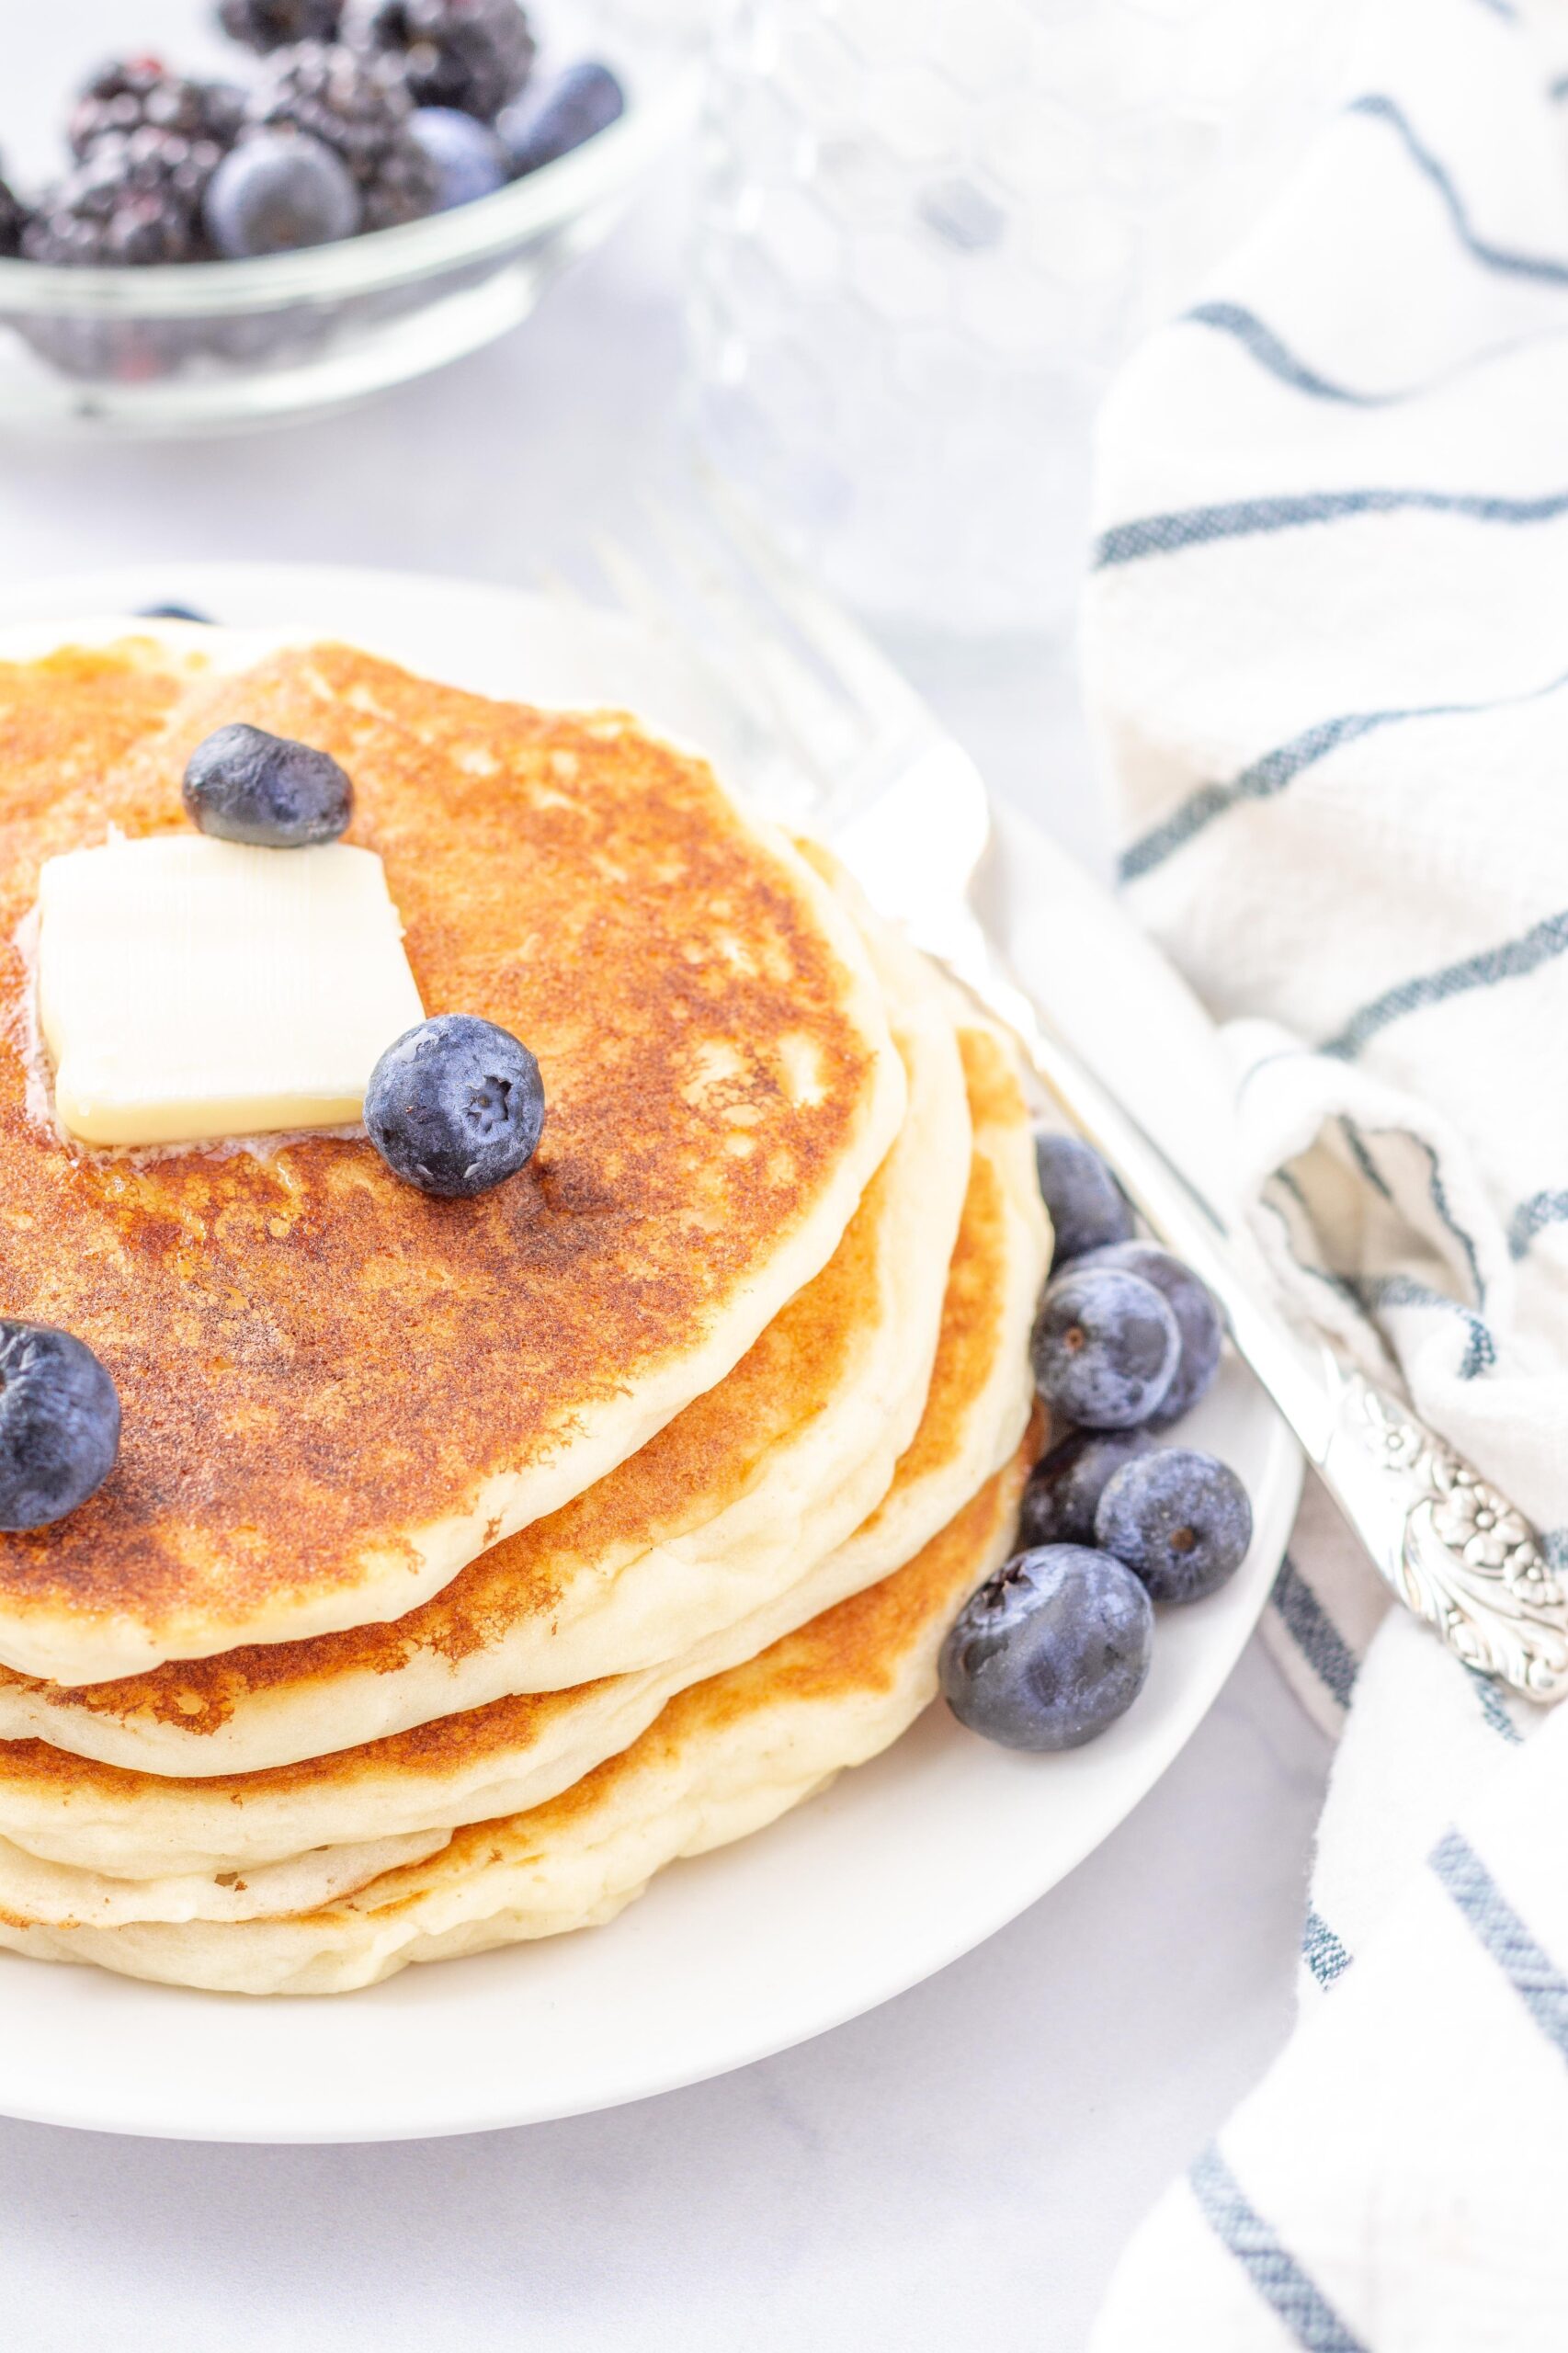  Syrup, butter, or fresh fruit - these gluten-free pancakes welcome all toppings.